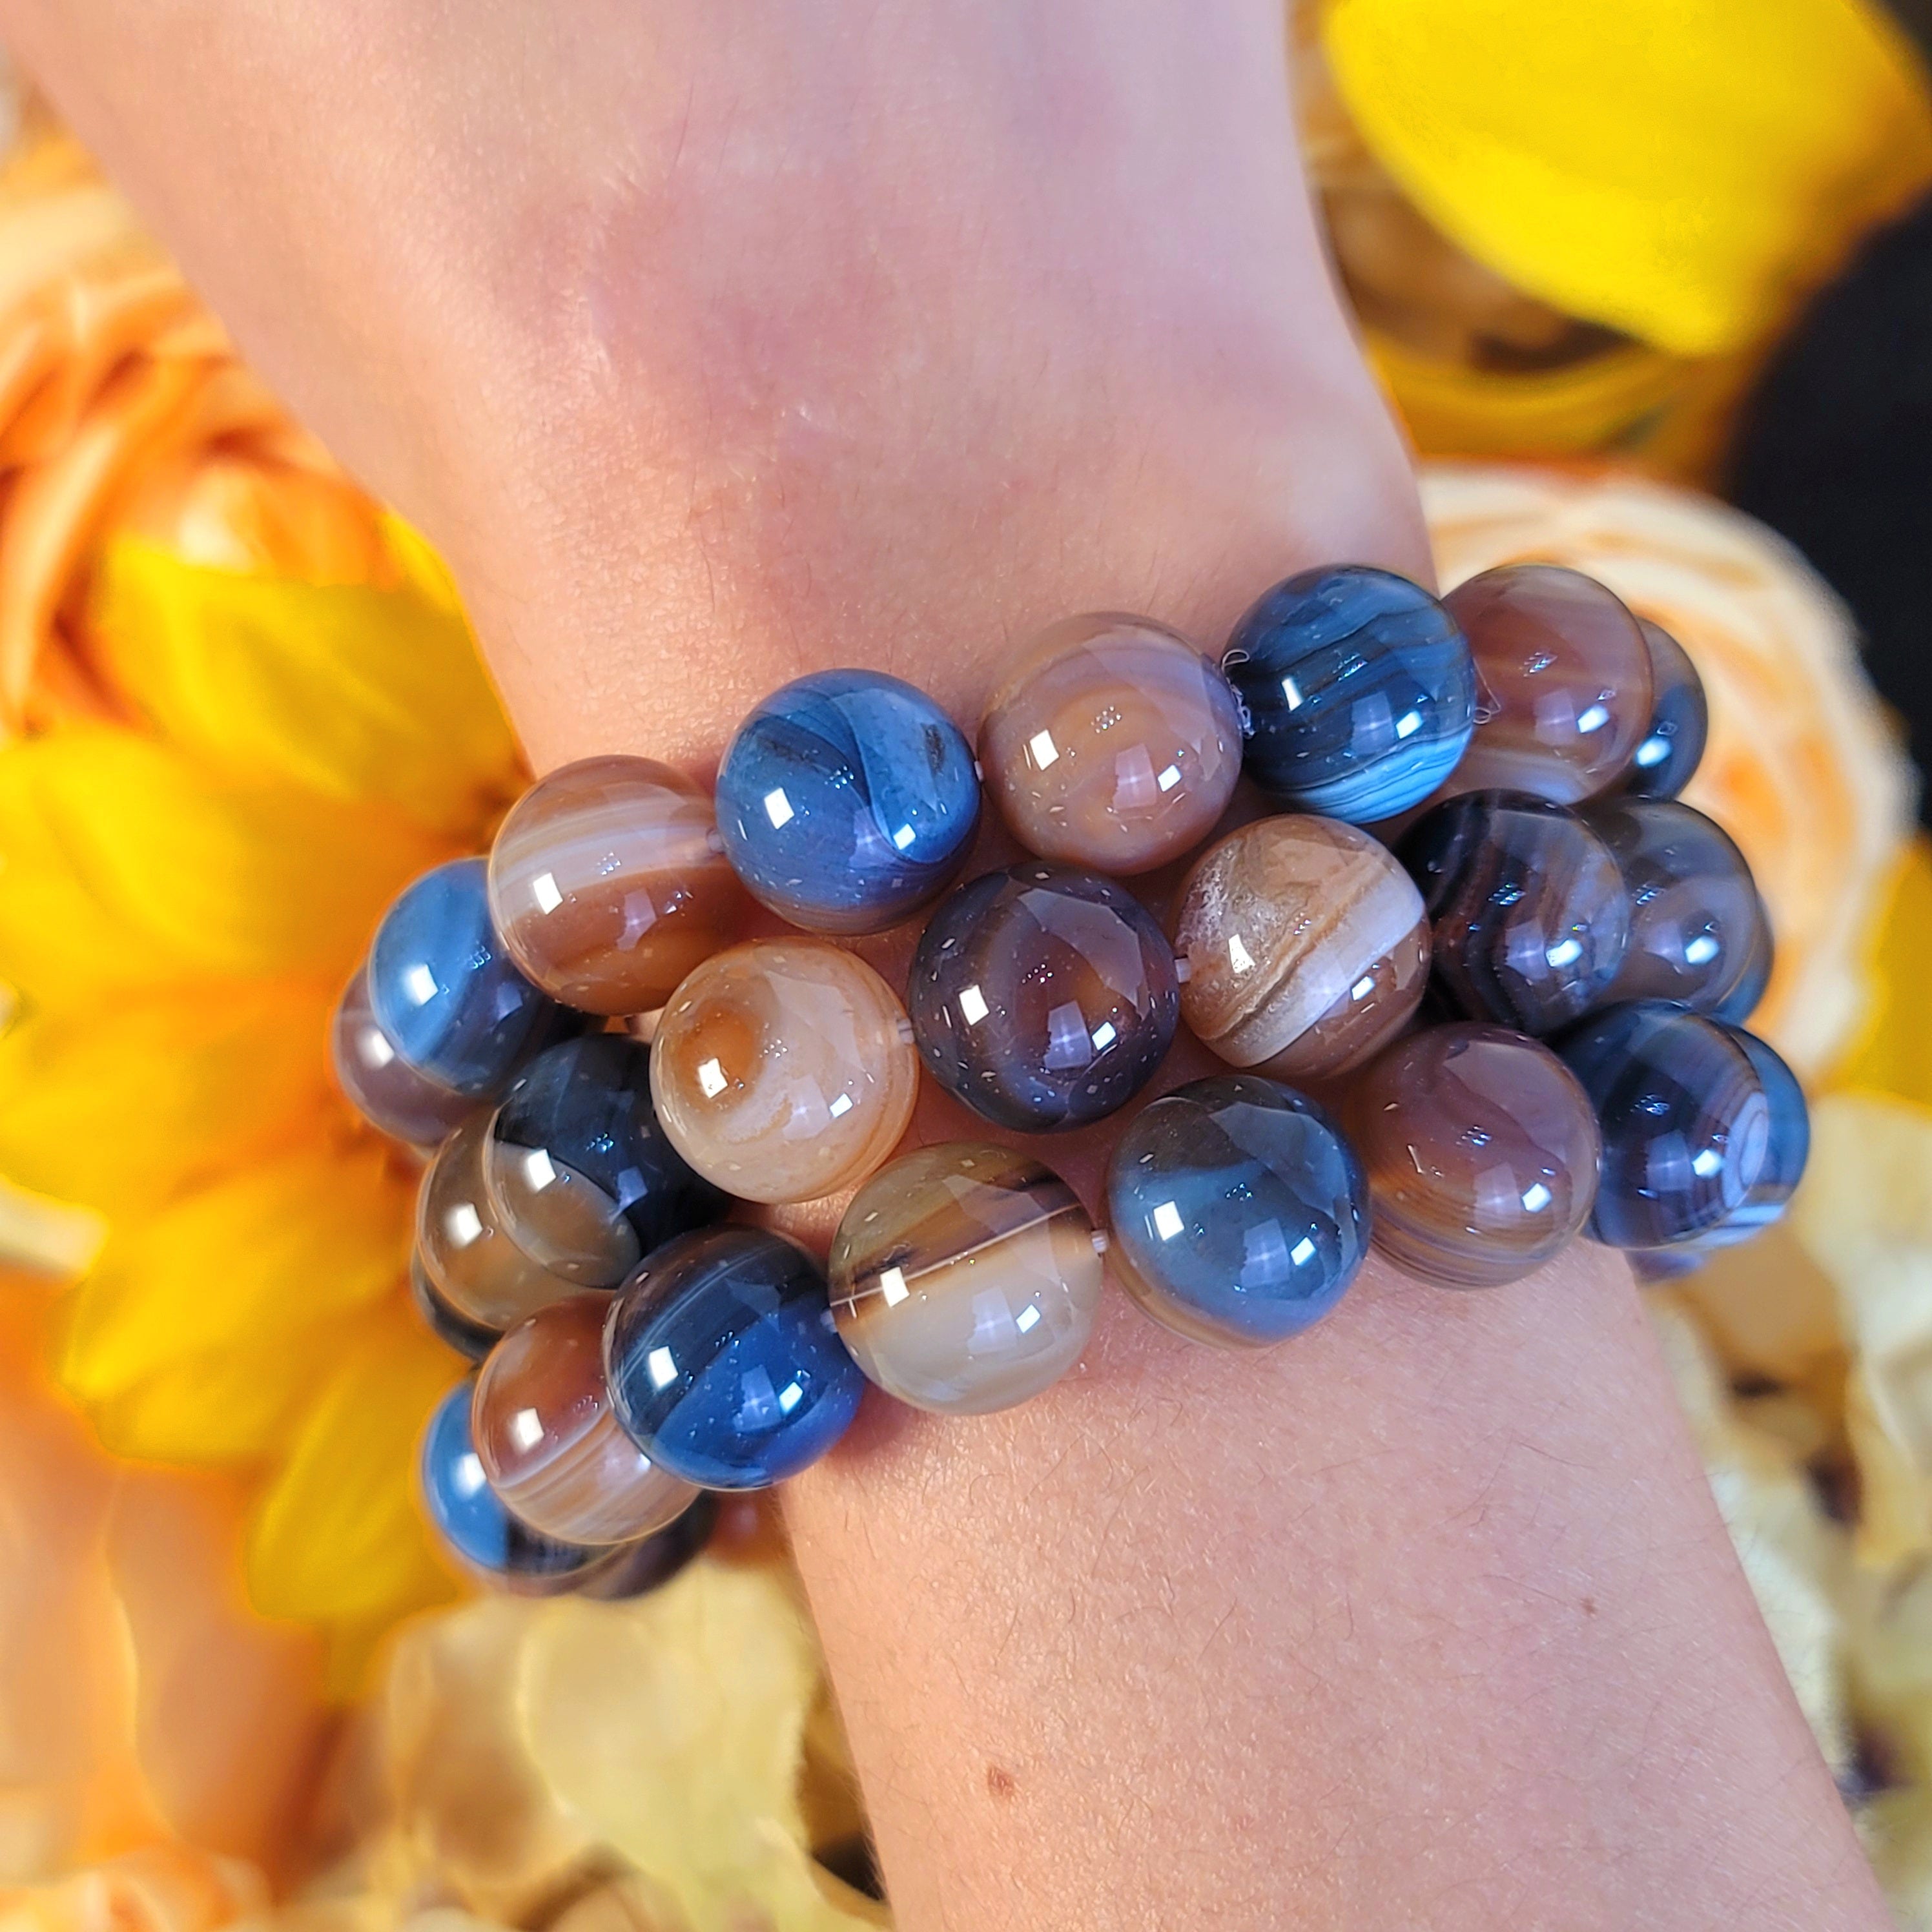 Botswana Agate Bracelet (AAA Grade) for Hope, Protection and Strength